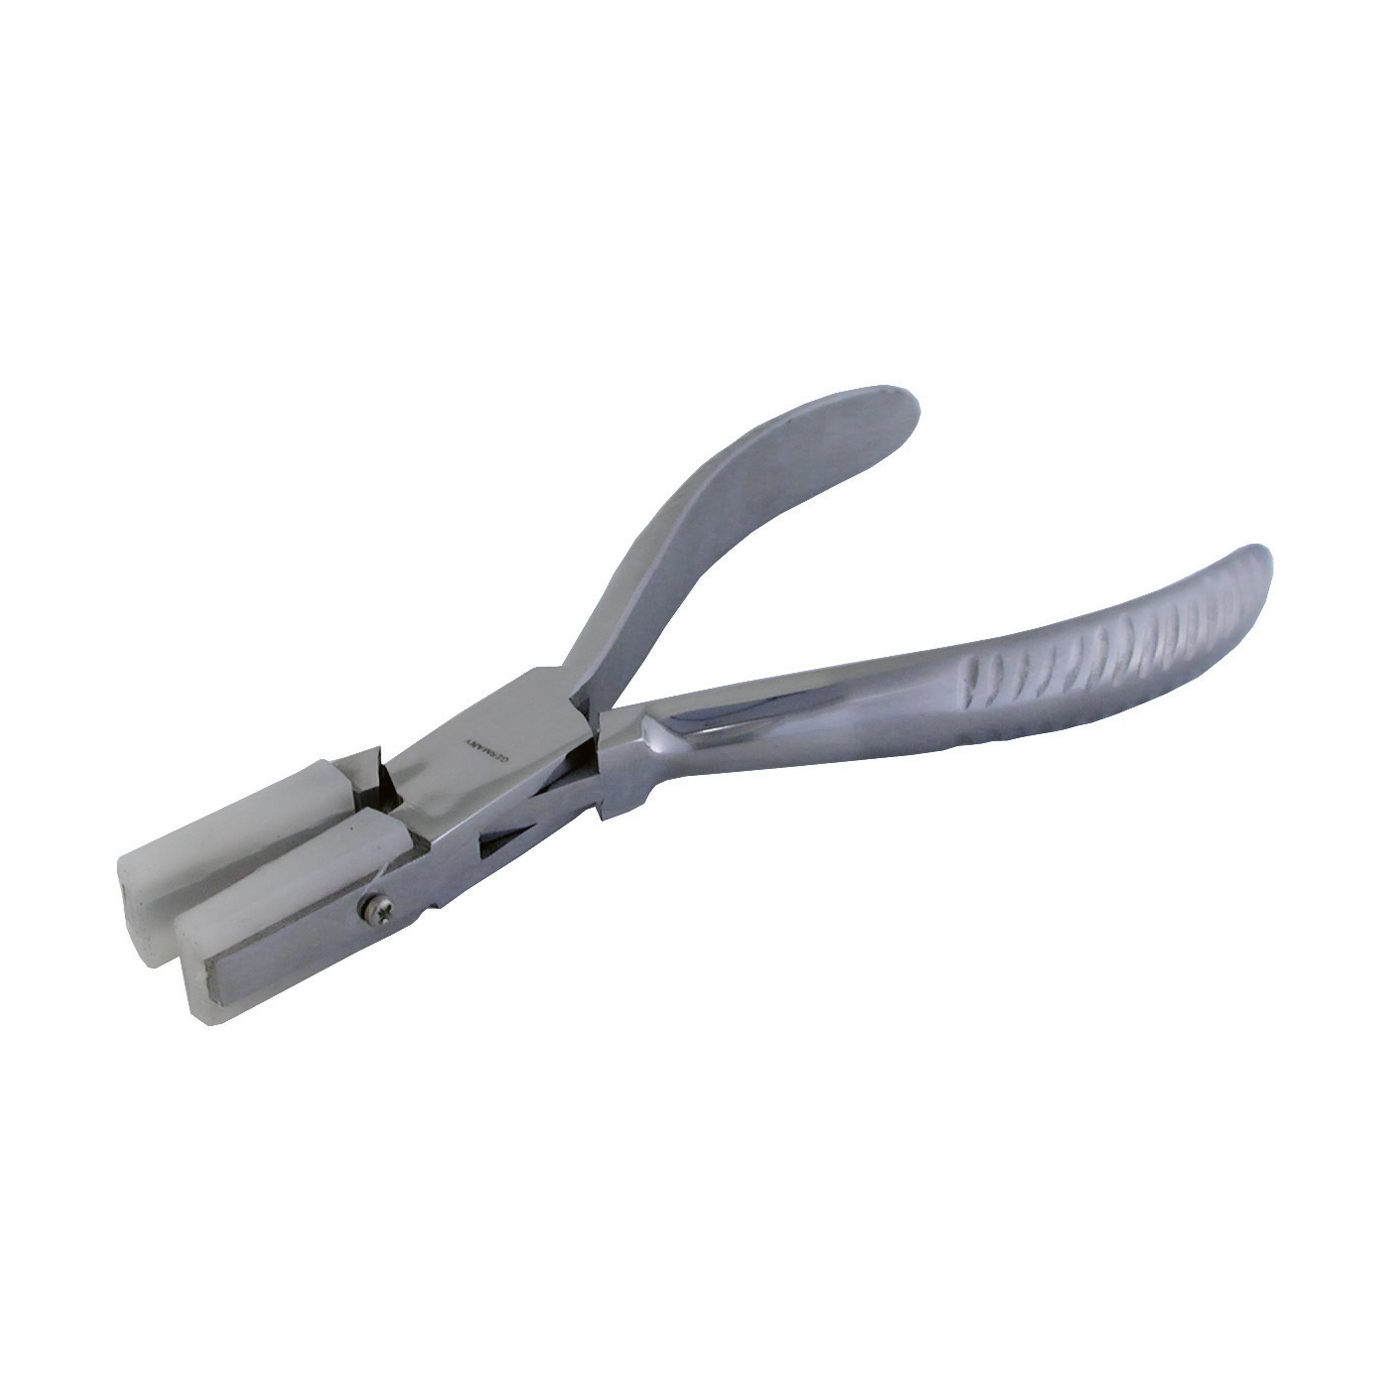 Flat Pliers with Nylon Jaws, 12 mm - 1 piece